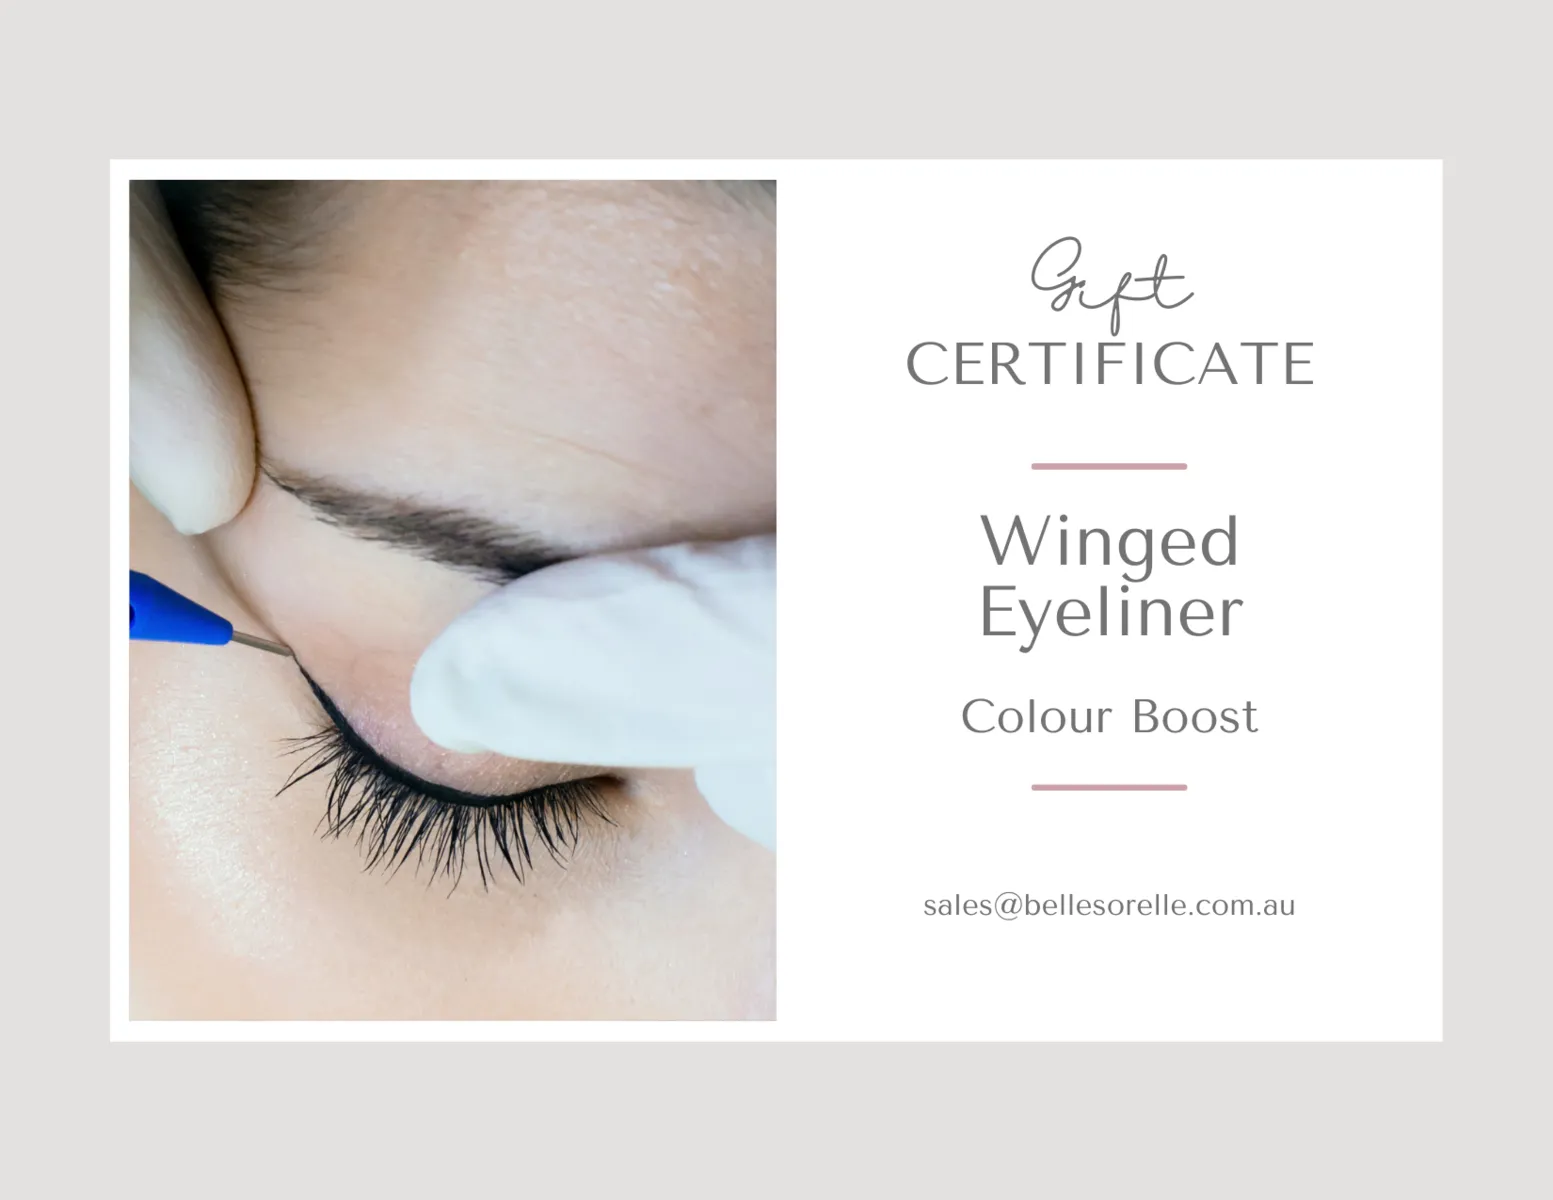 Winged Eyeliner - Colour Boost